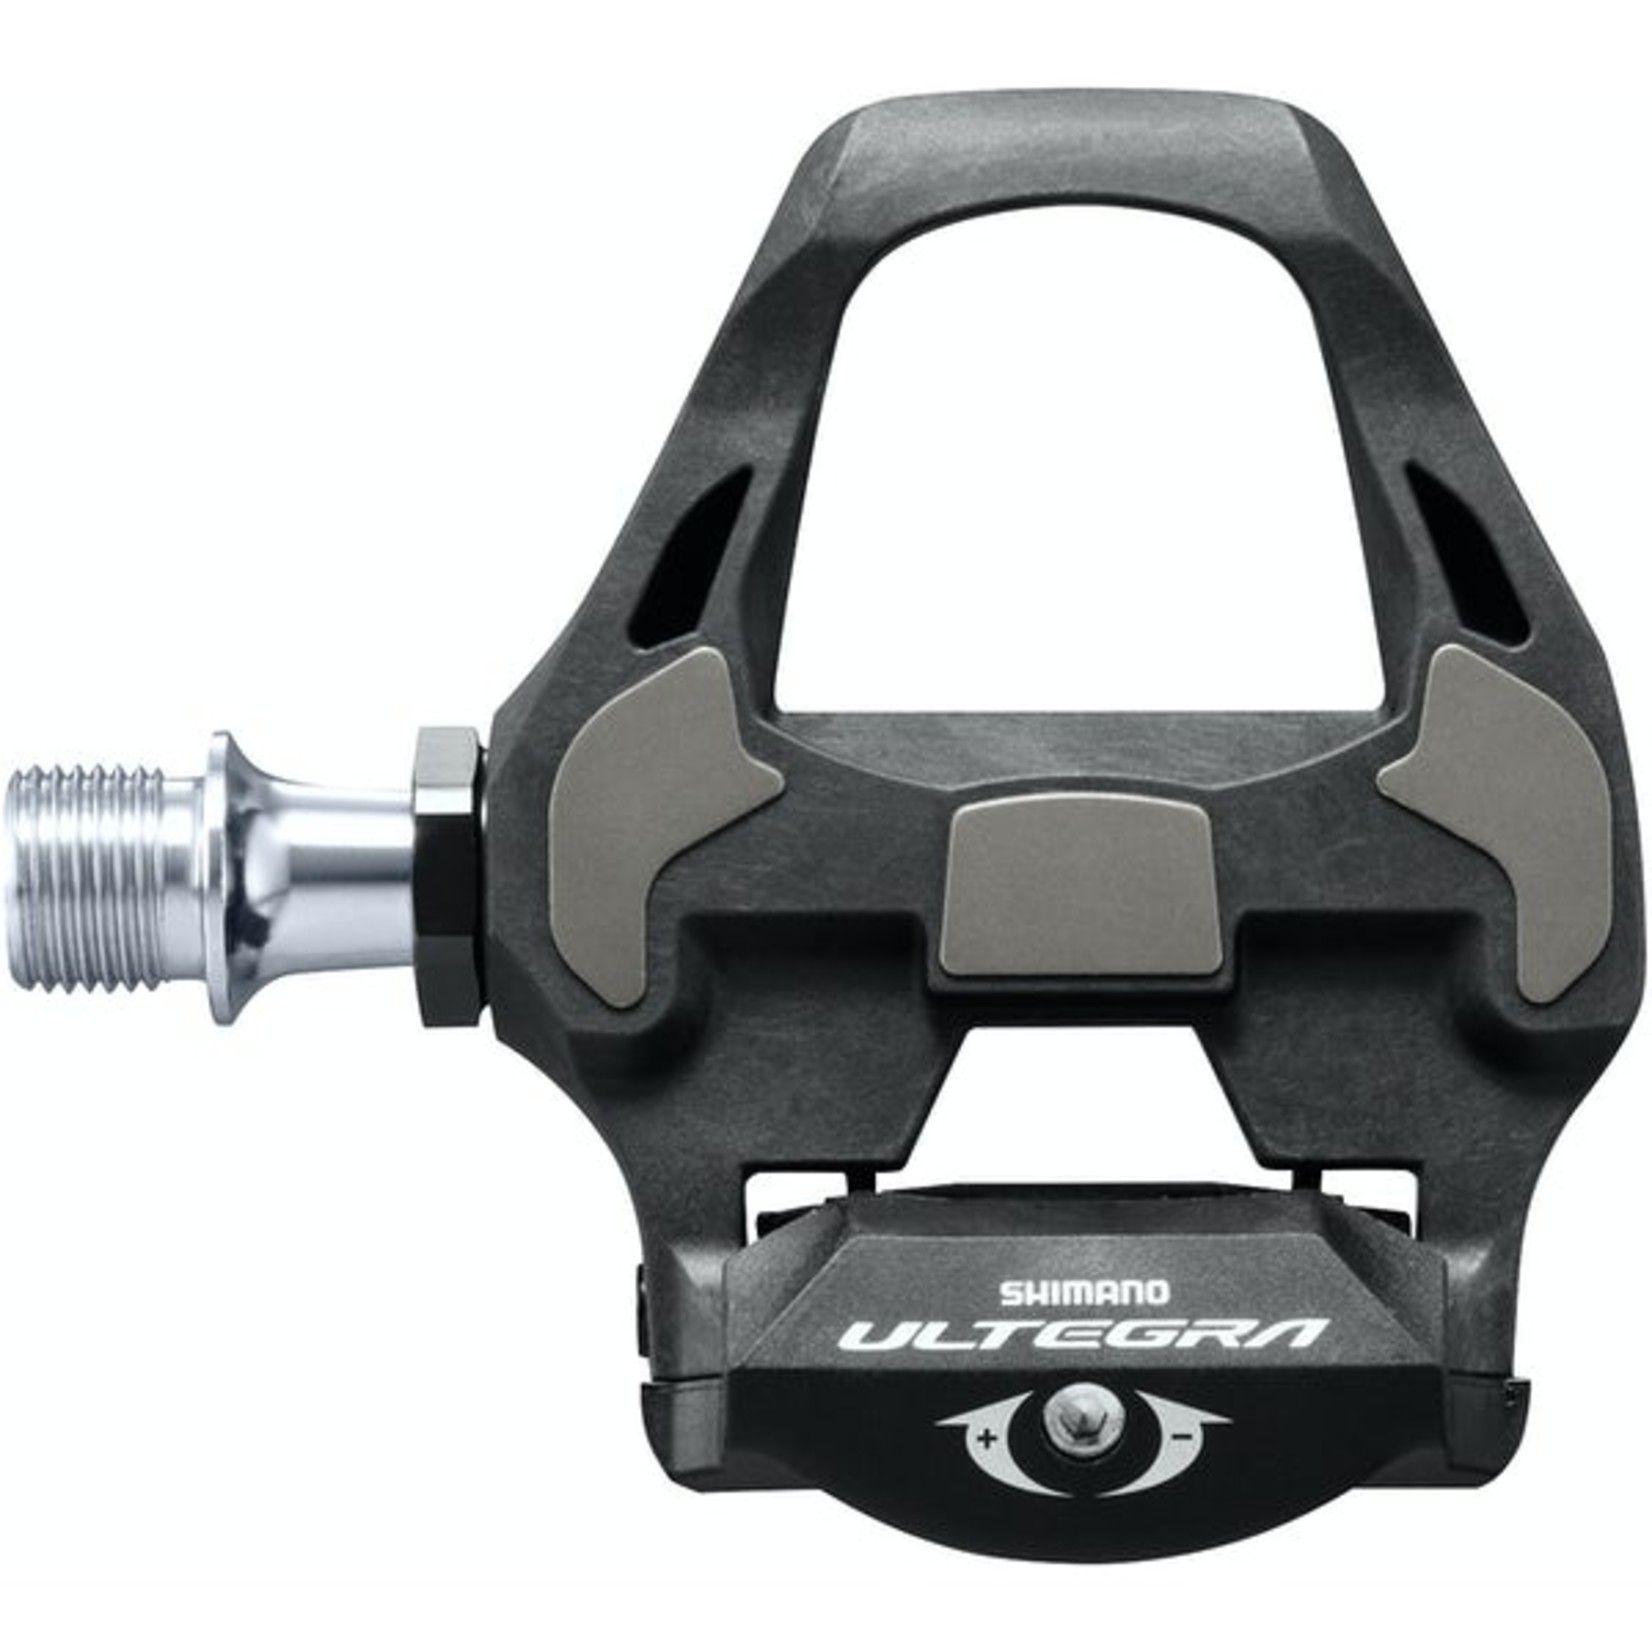 Shimano PD-R8000 Ultegra SPD-SL Pedal with cleat